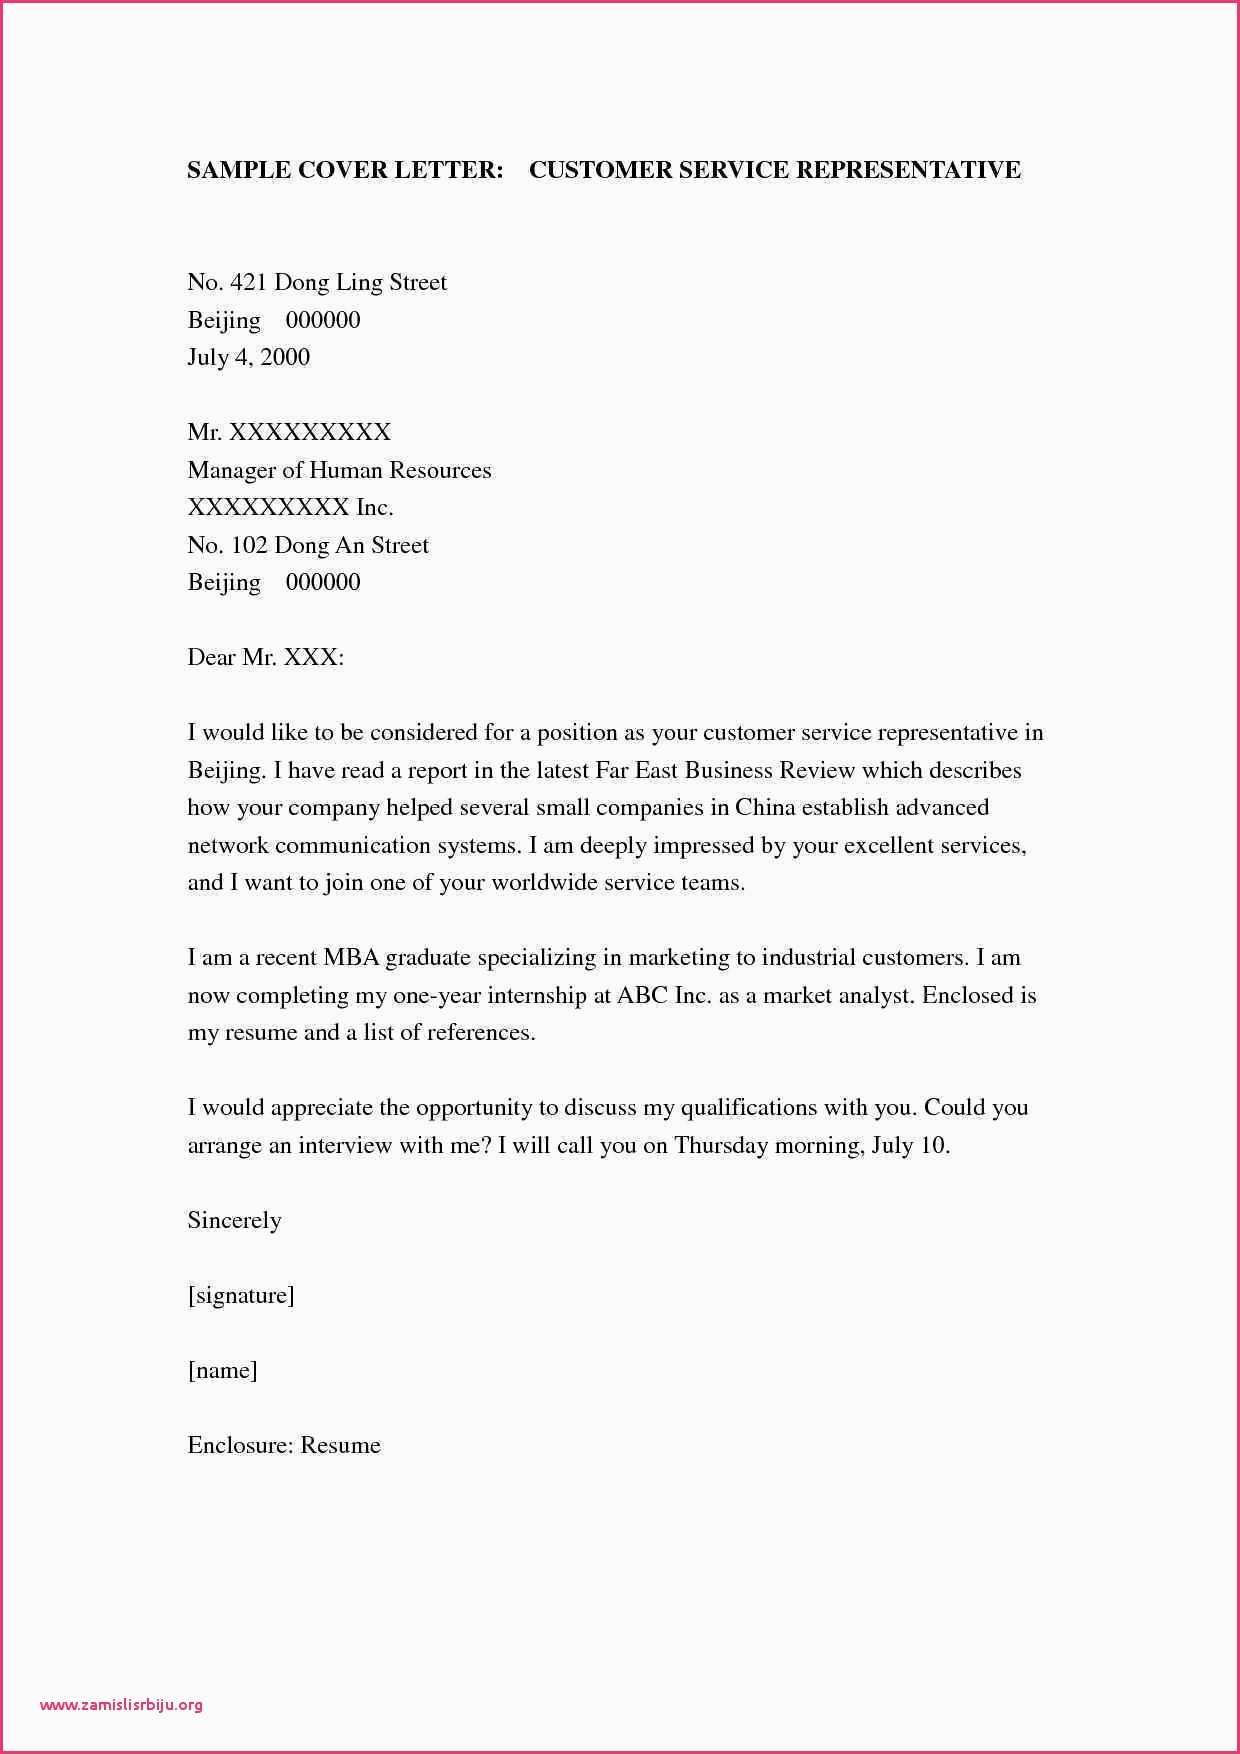 Customer Service Cover Letter Template